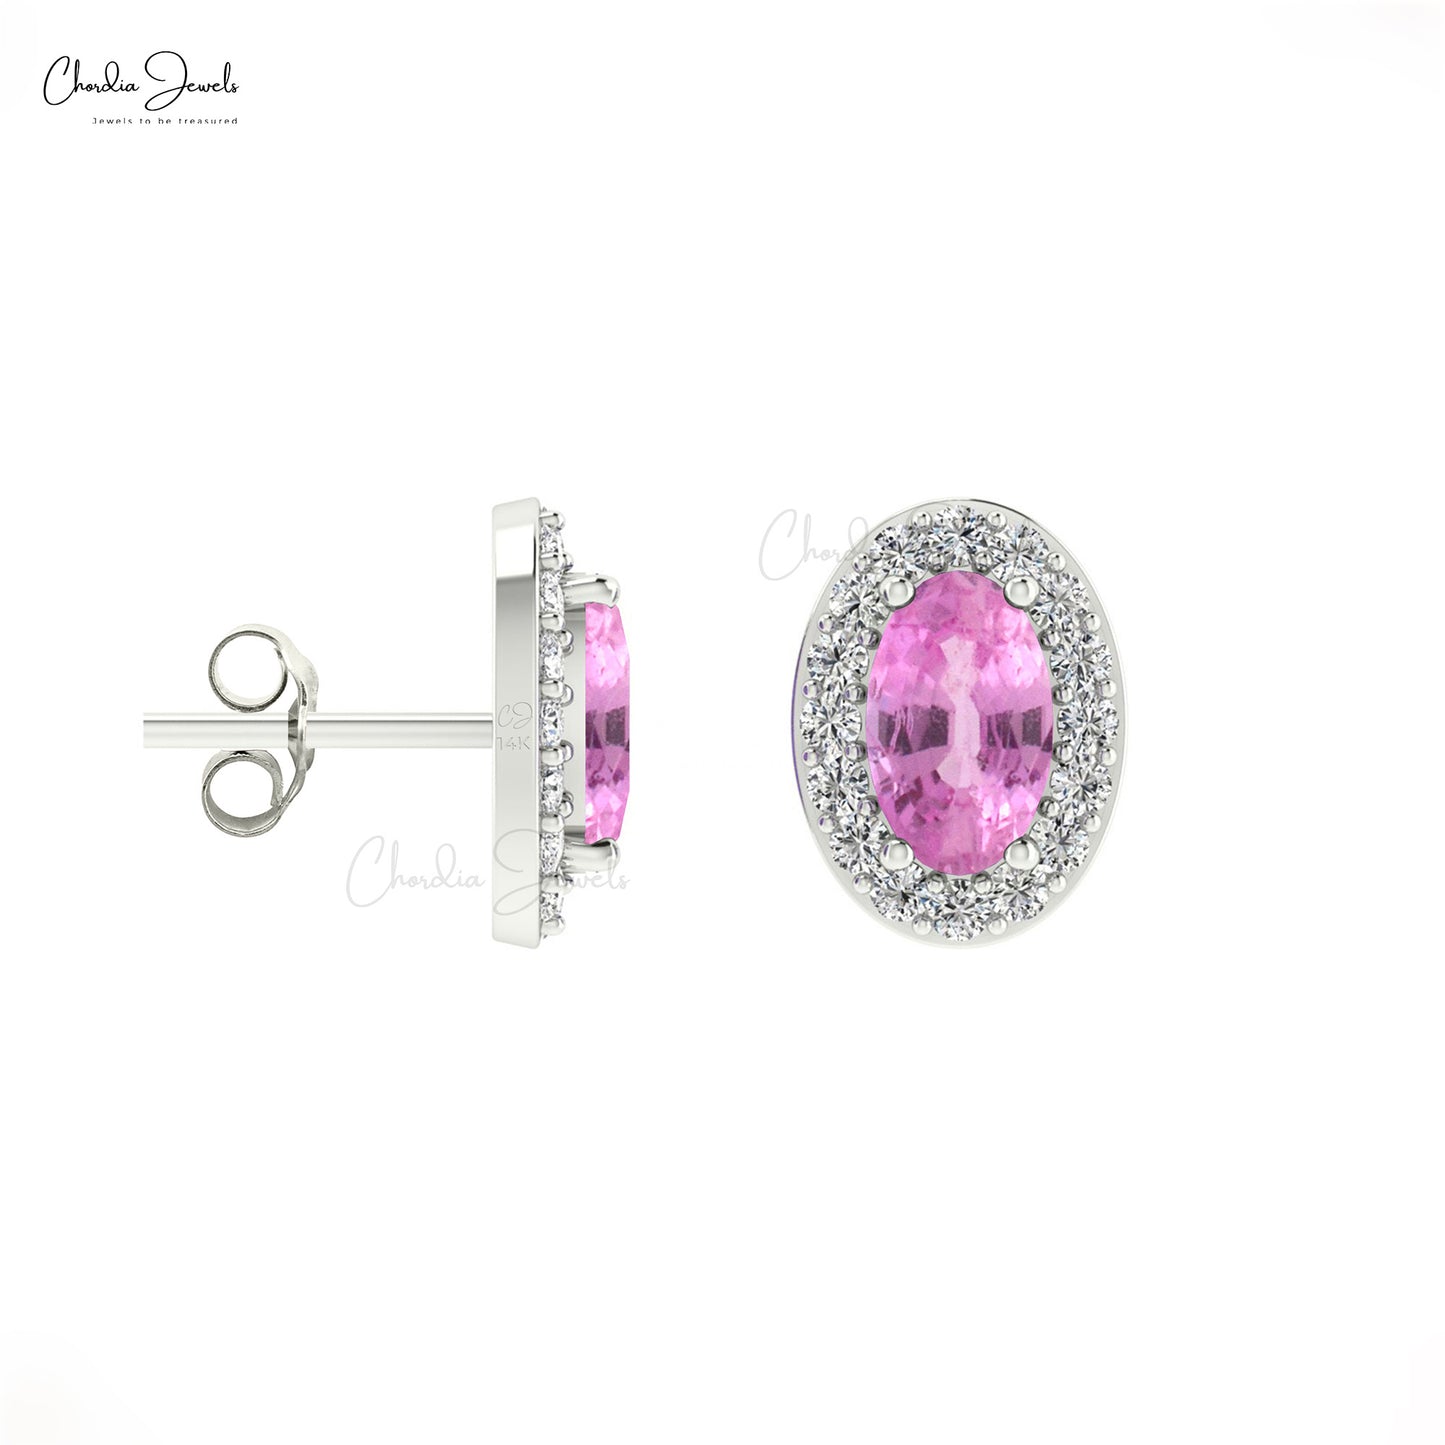 Natural Pink Sapphire and White Diamond Halo Stud Earrings 14k Solid Gold Studs Minimalist Jewelry For Mother's Day Gift